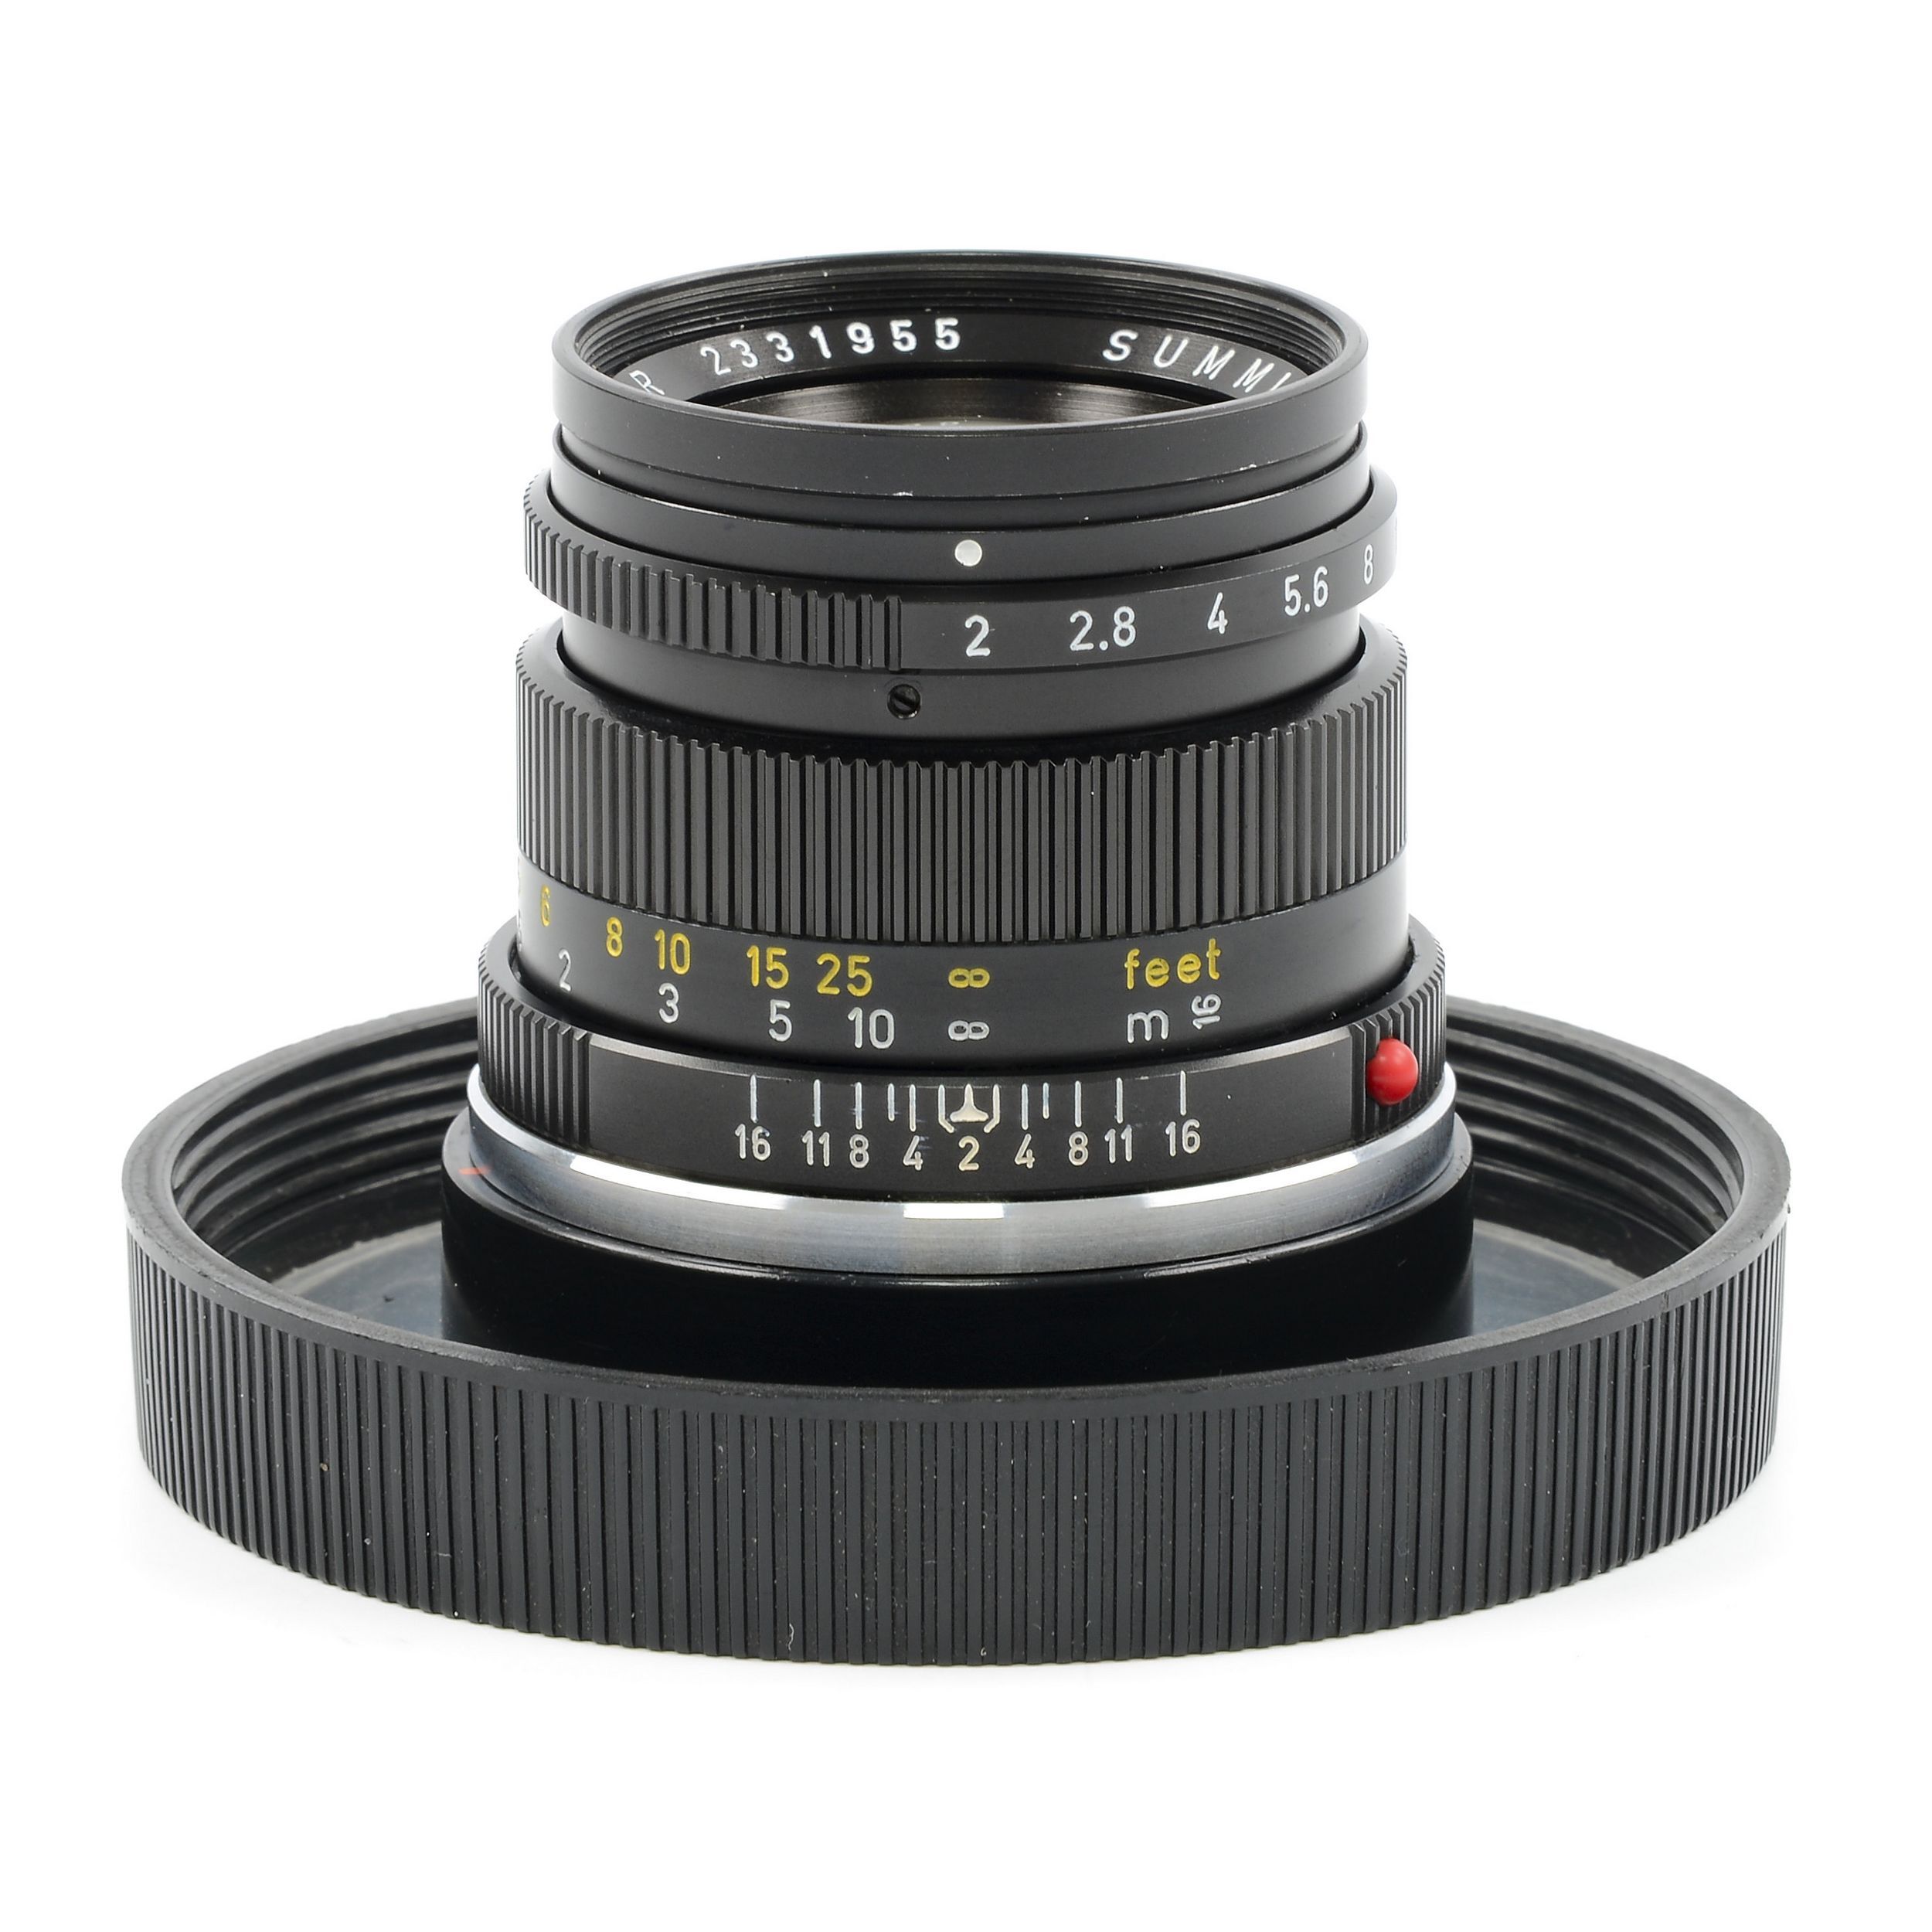 leica summicron r 50mm f2 serial numbers